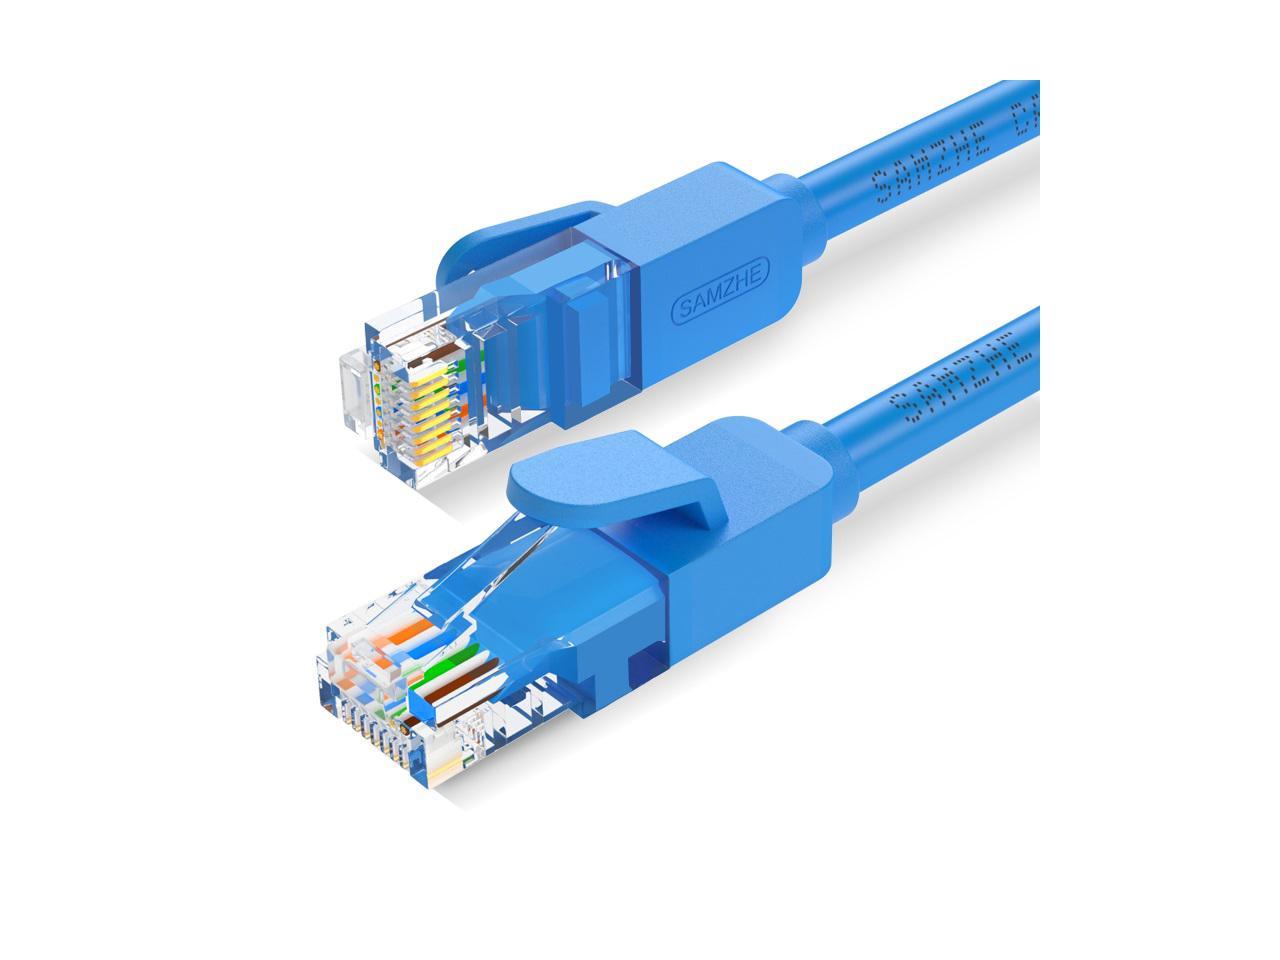 AMC CC5E-B100B 100 FT Cat 5E Blue Cat 5E 350 MHz UTP Blue Network Cable 